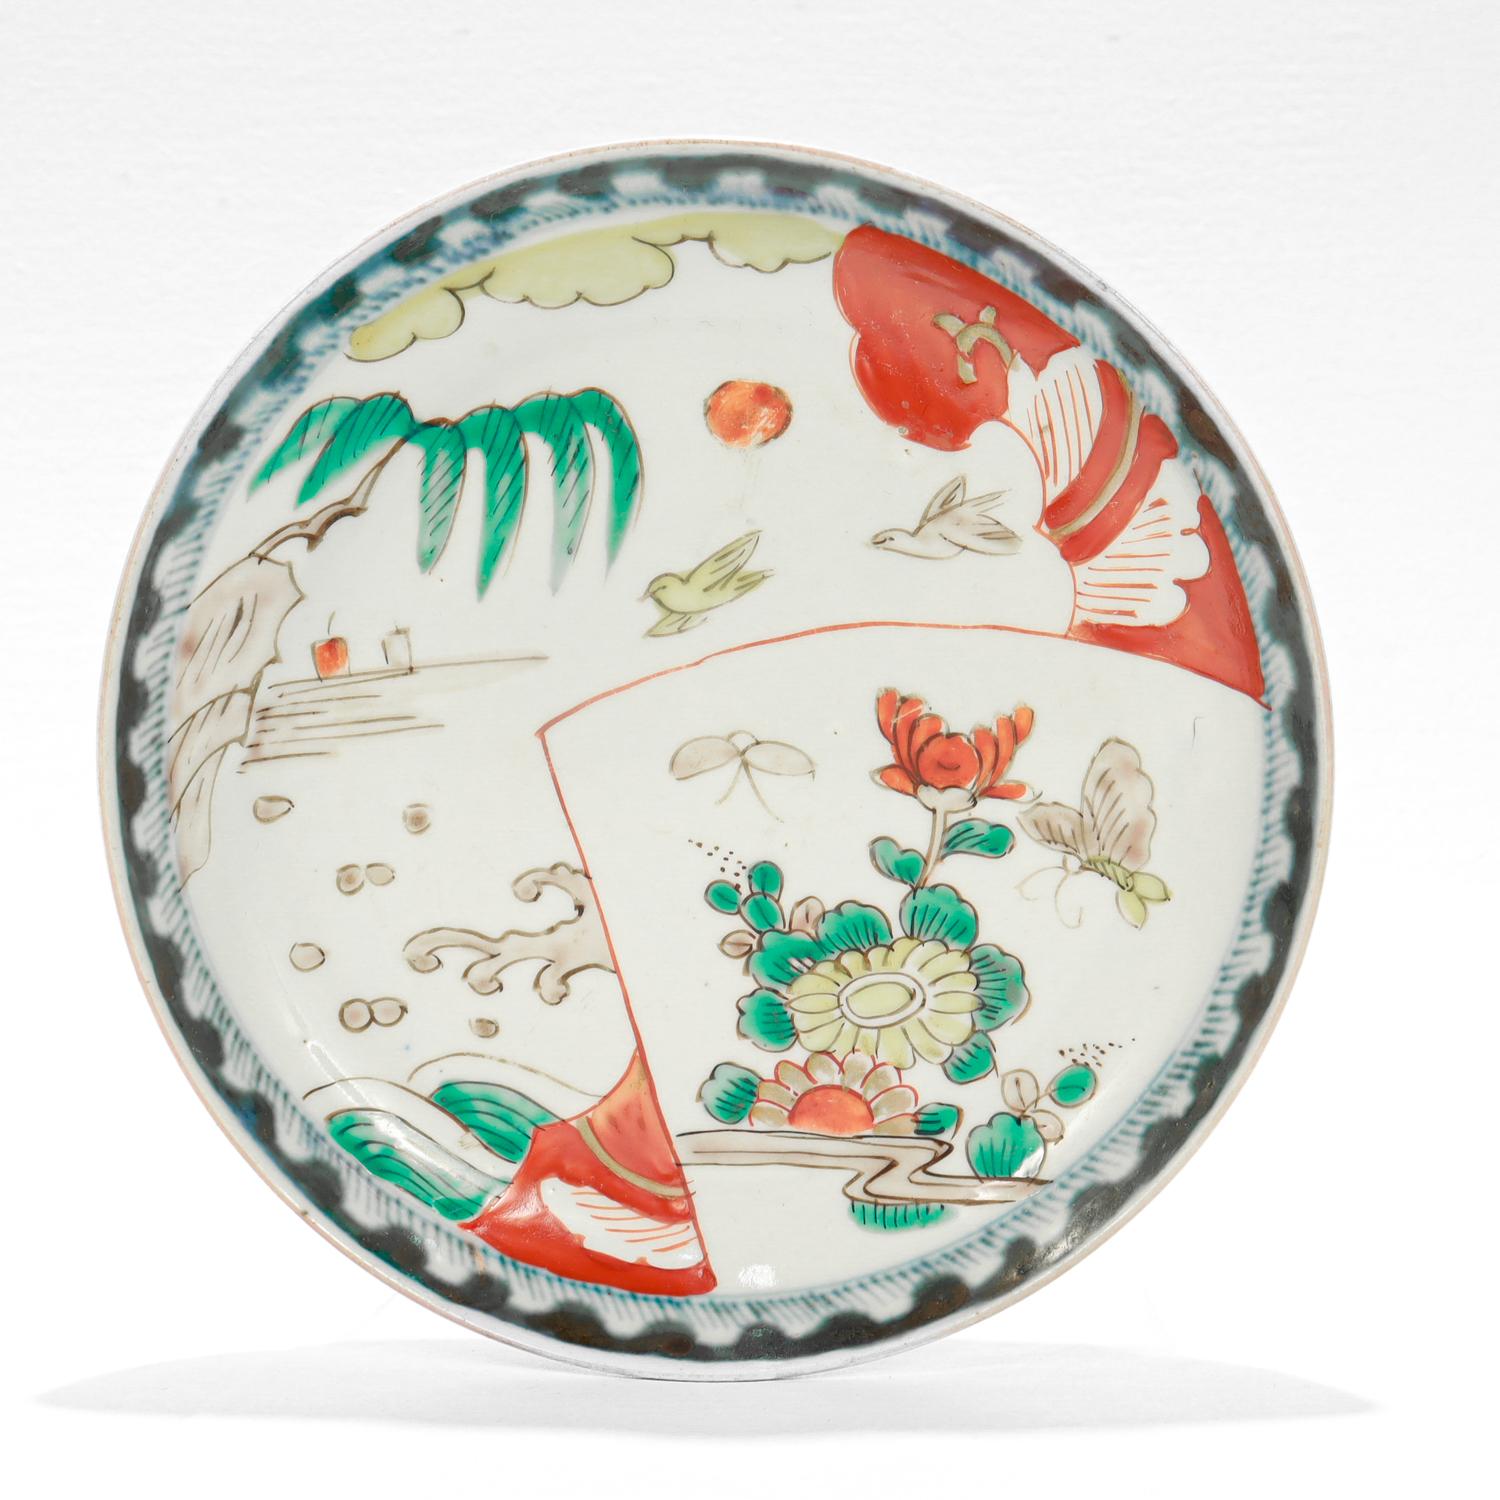 A fine antique Japanese (or Chinese) porcelain plate.

With a white ground decorated with an ocean landscape scene along with flowers and birds in tones of green, red, yellow, and brown.

The rim with a blue underglaze pattern to its border.

Simply